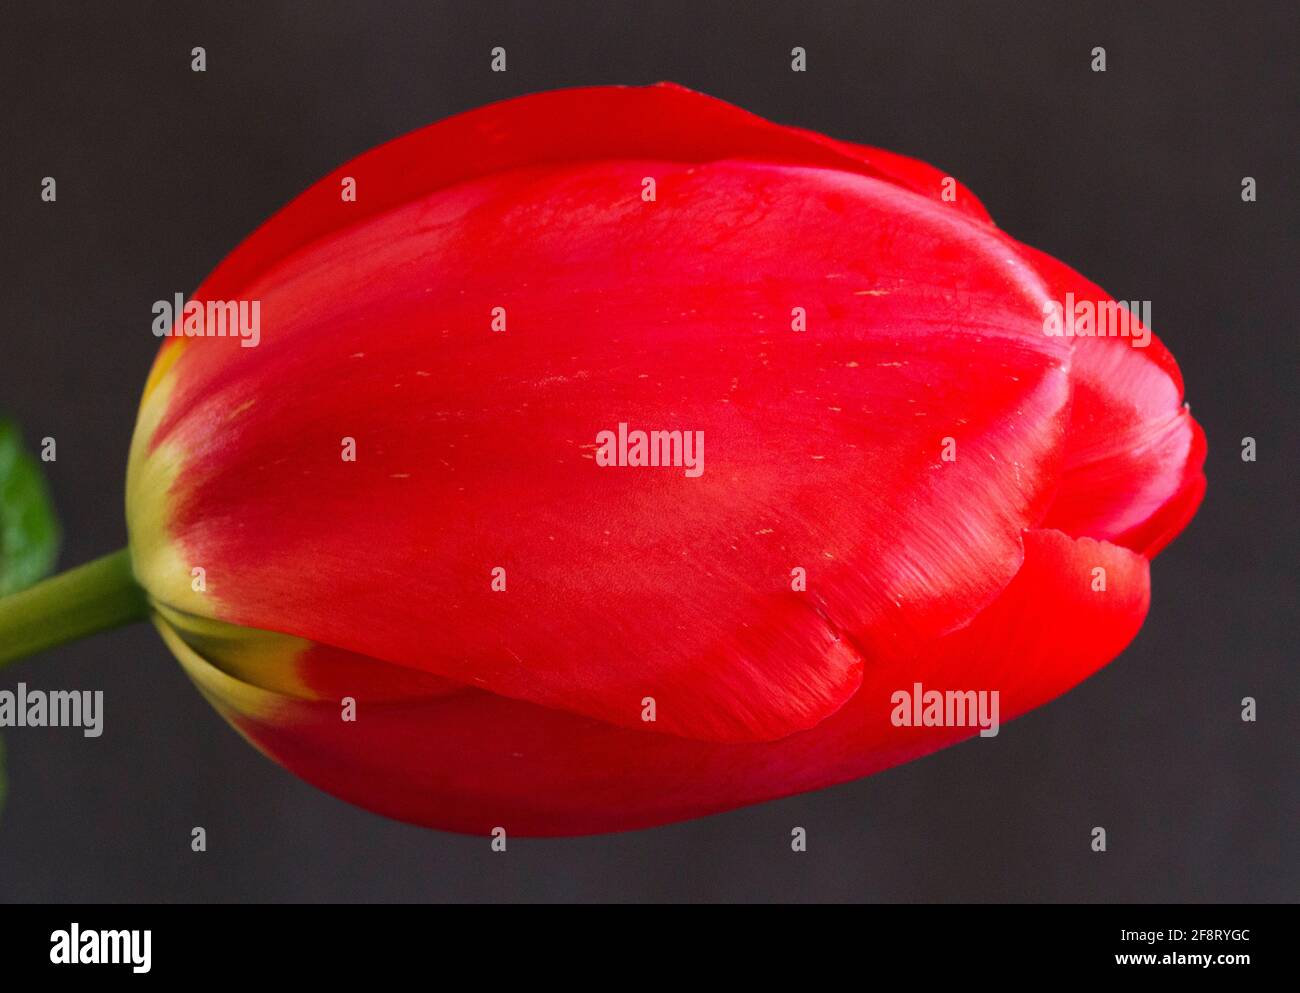 The Tulip is a popular garden and cut flower. They originated in the Middle East and were the symbol of the Ottoman Empire. Stock Photo